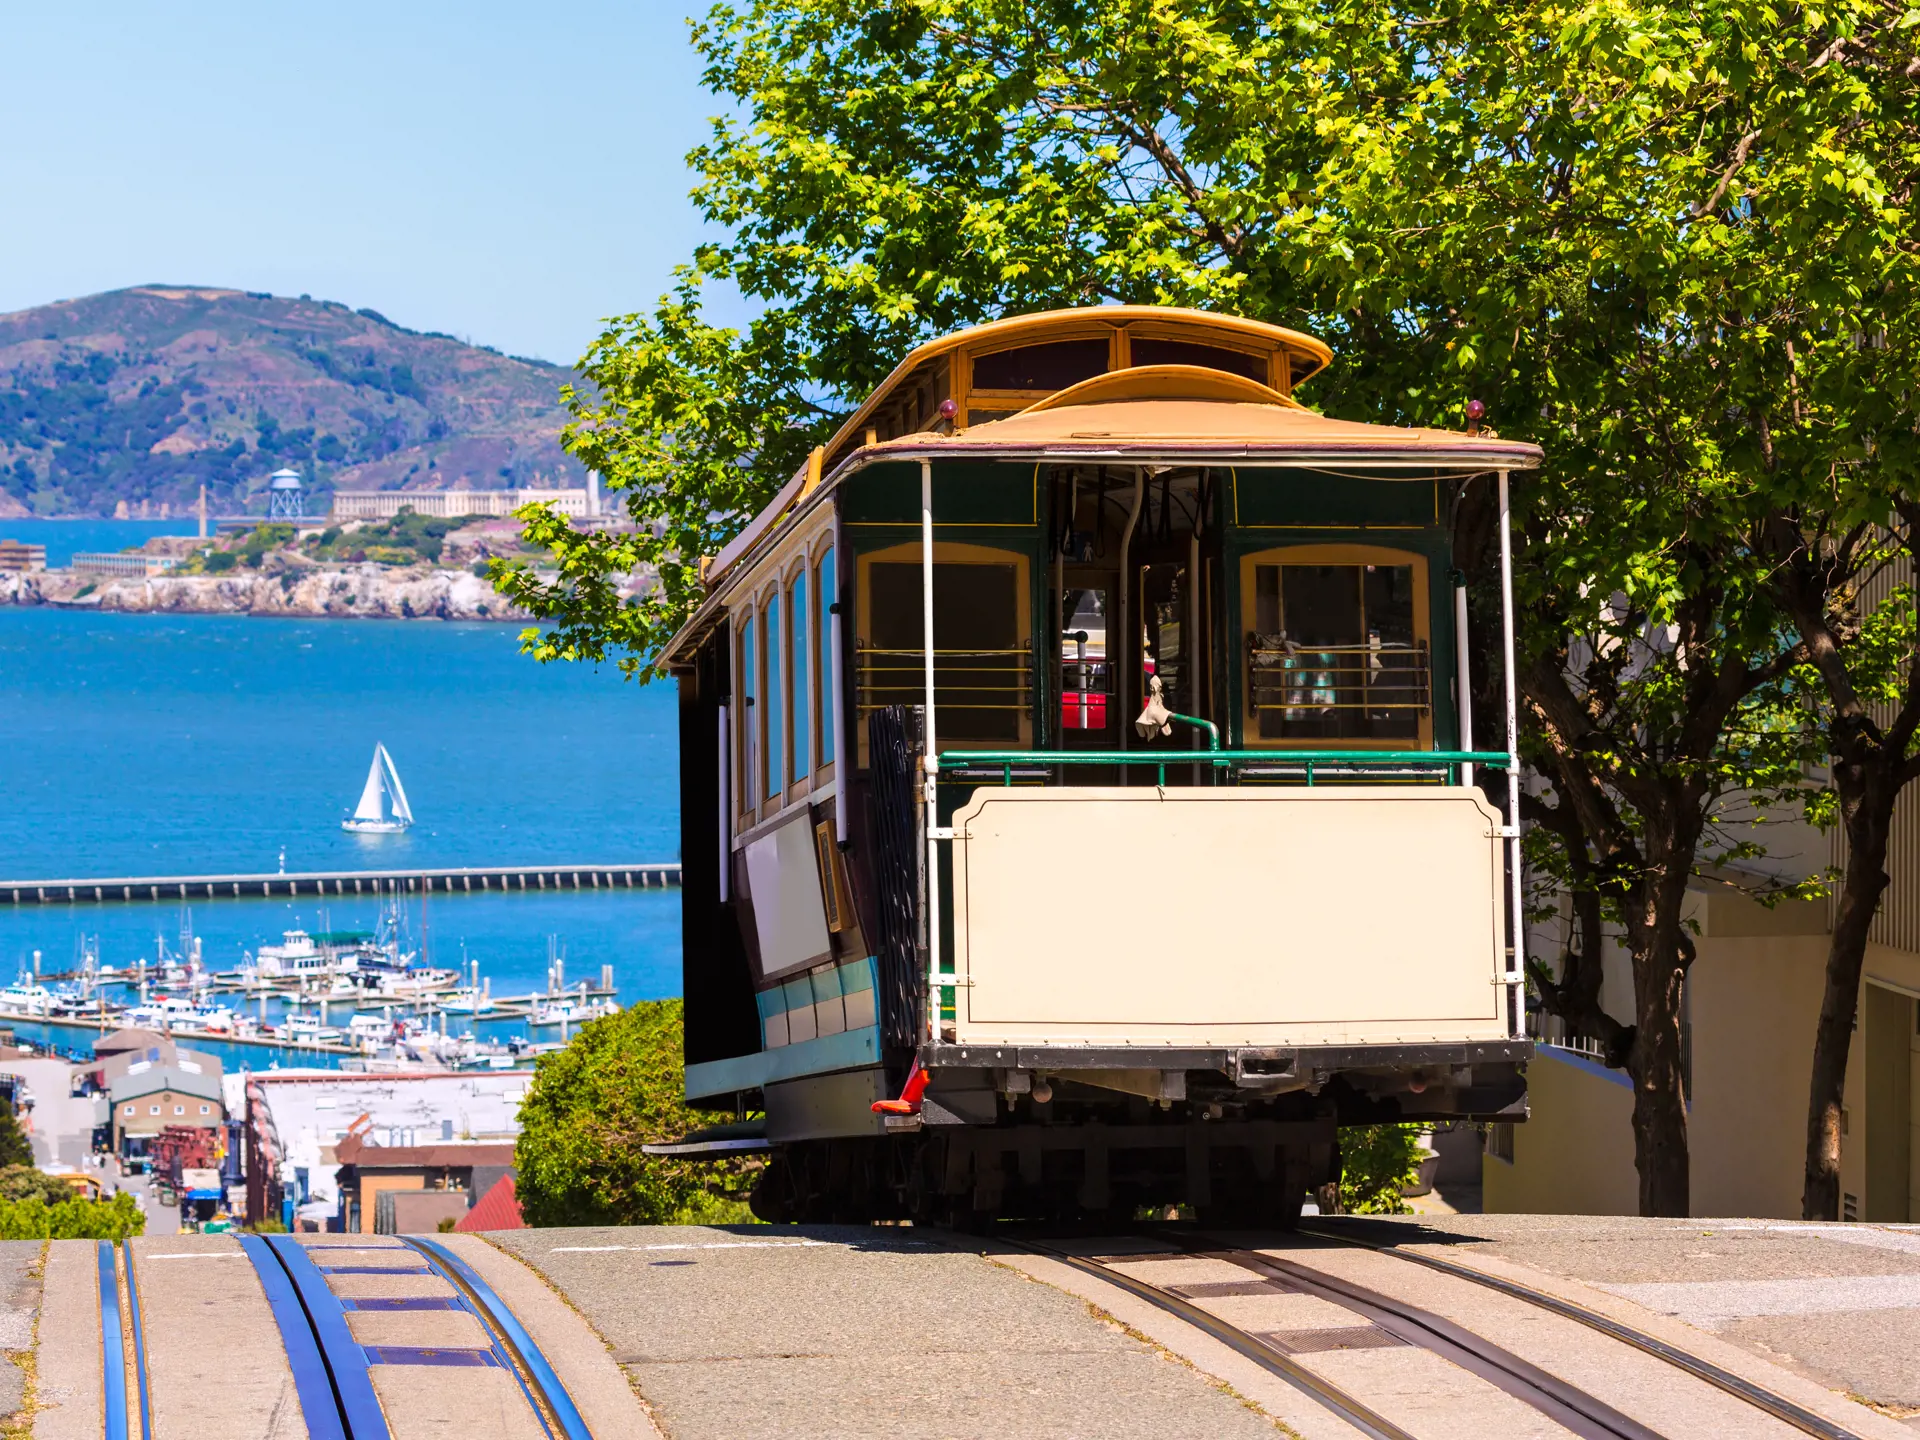 shutterstock_175626272 San francisco Hyde Street Cable Car Tram of the Powell-Hyde in California USA.jpg